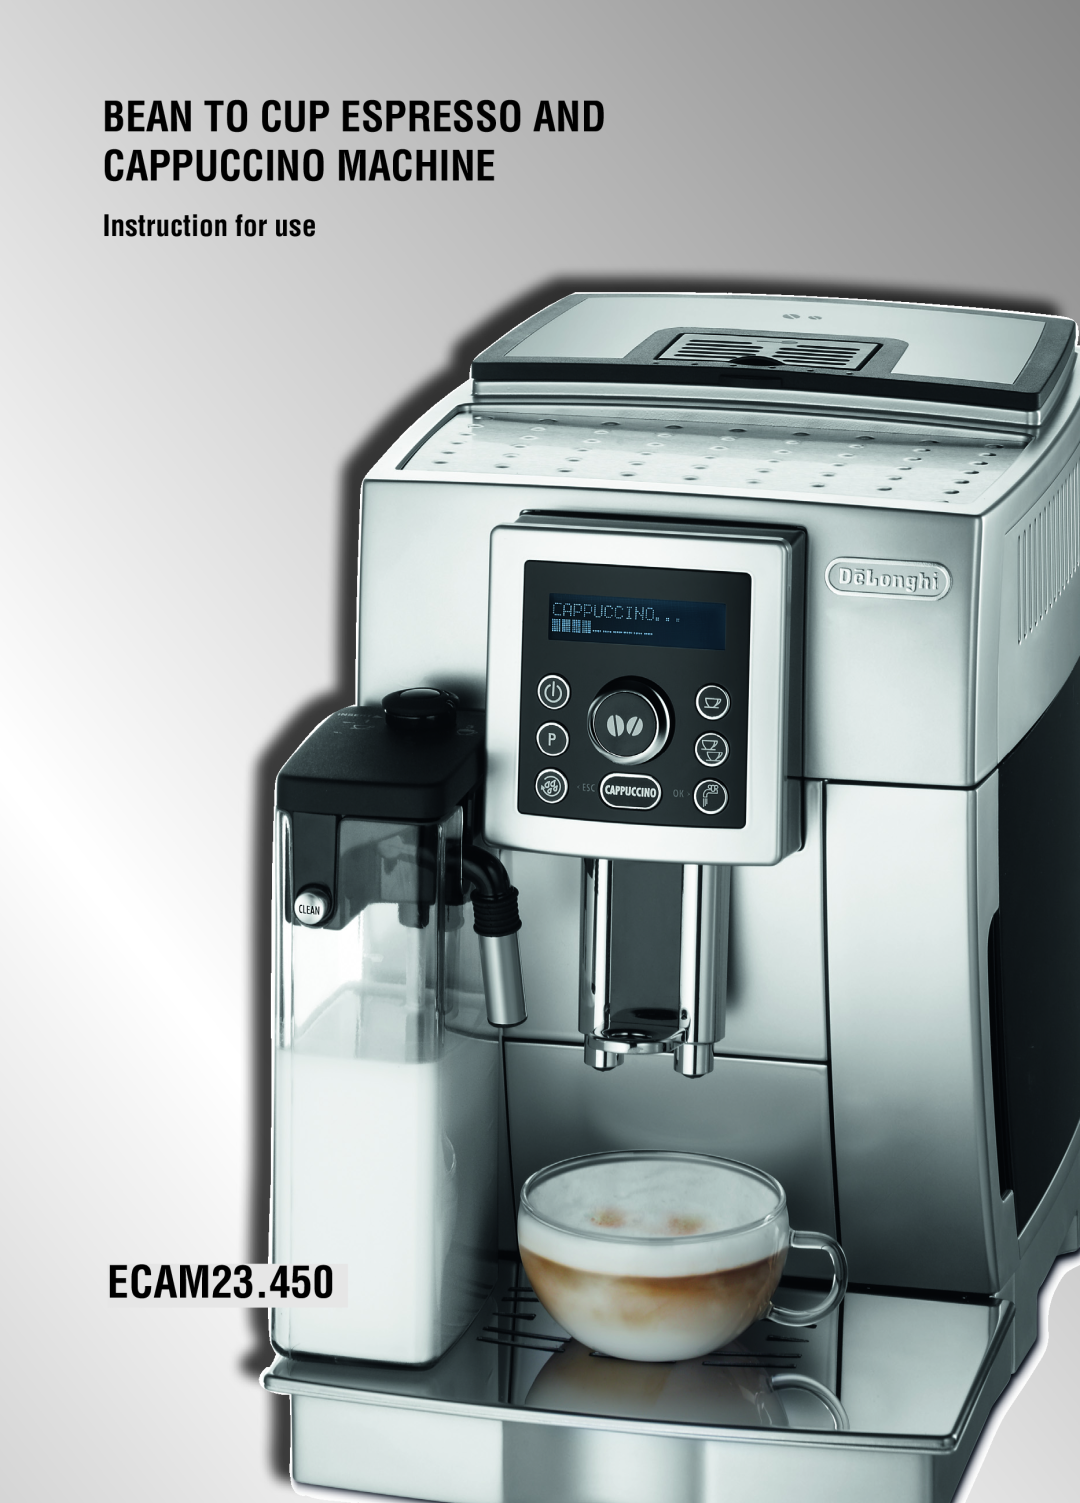 DeLonghi ECAM23.450 manual Bean To Cup Espresso And Cappuccino Machine, Instruction for use 